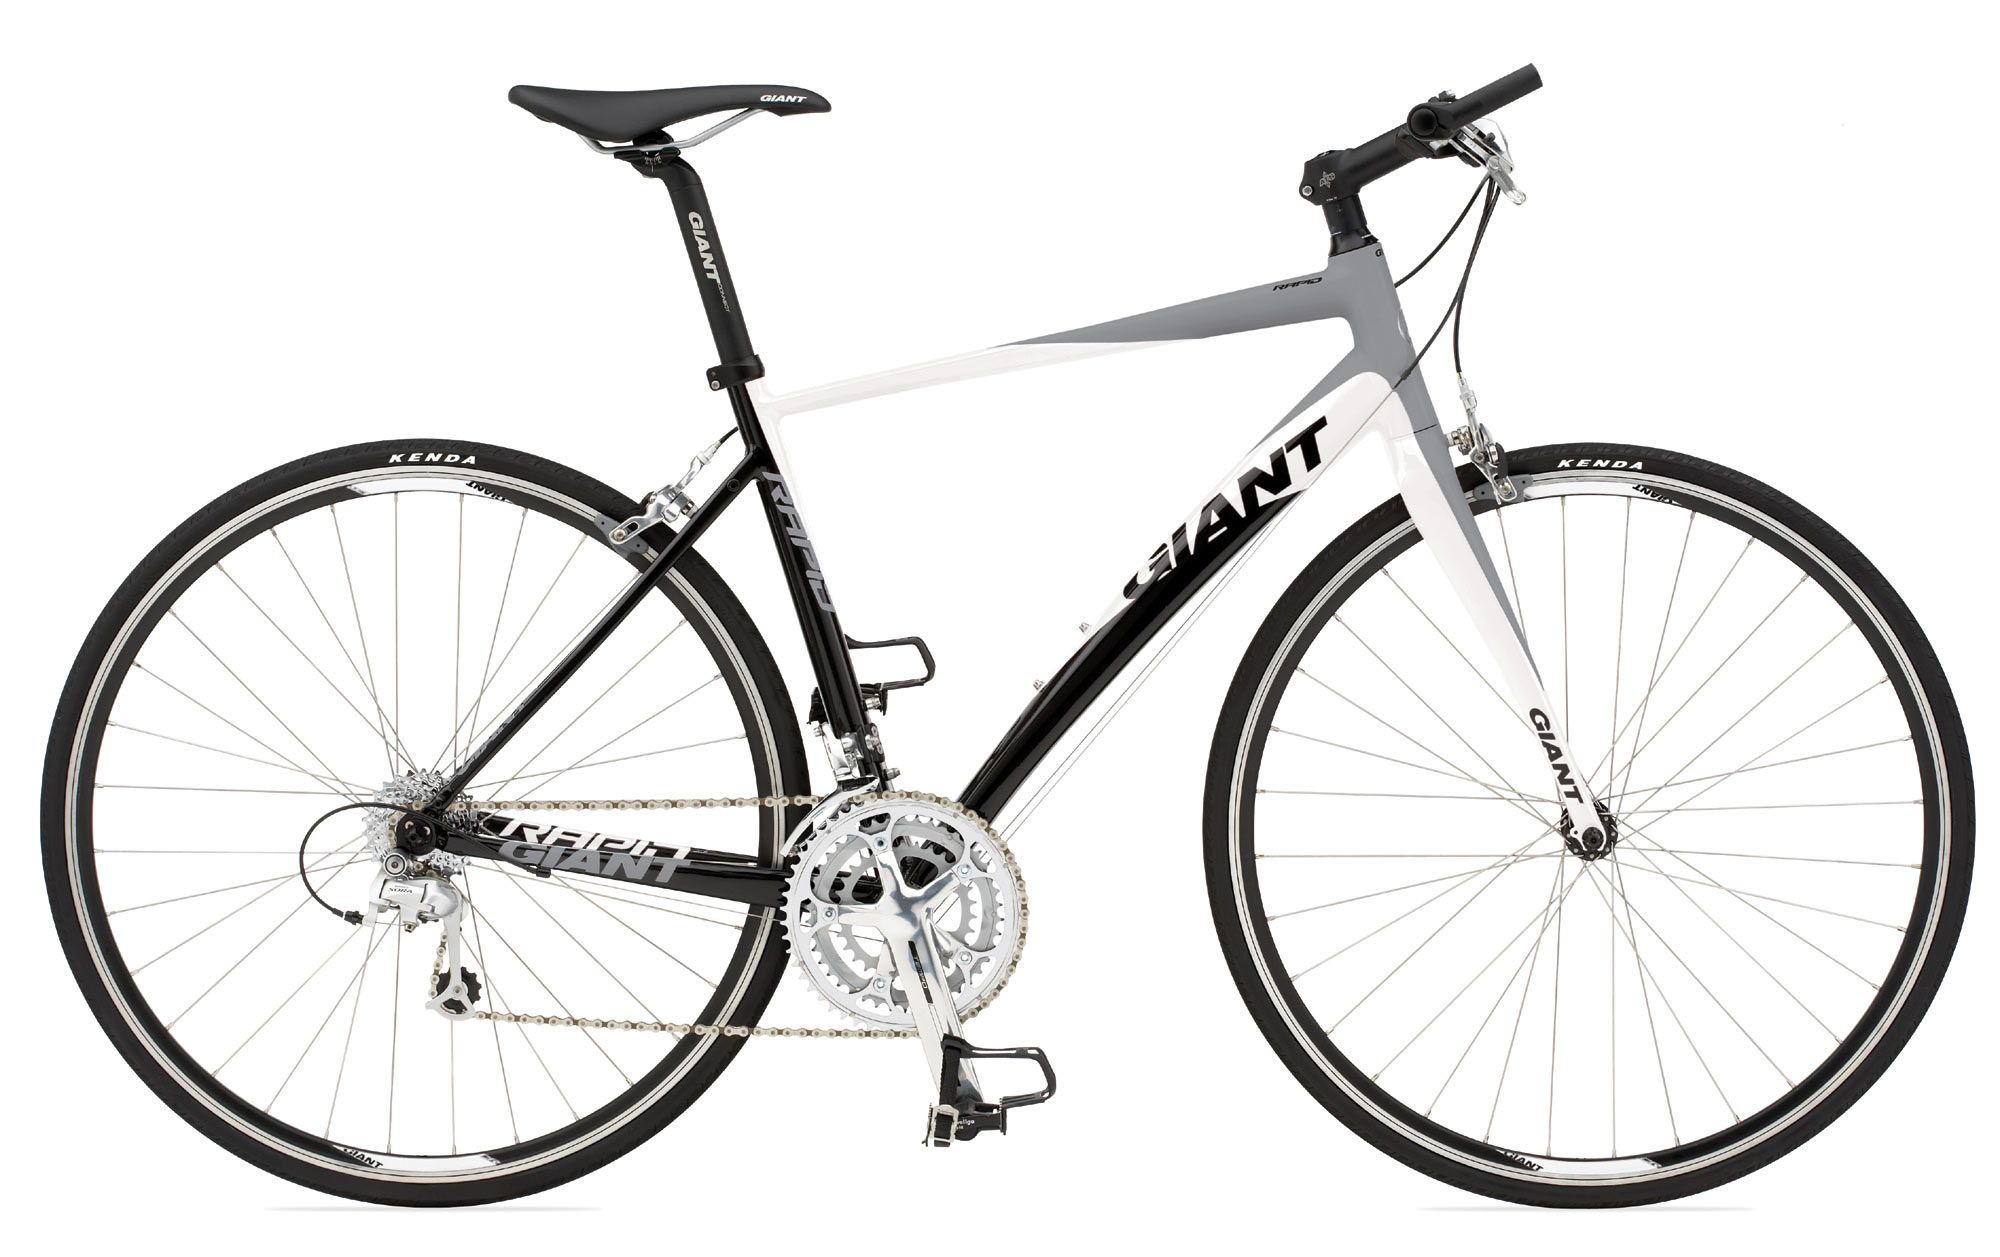 2010 Giant Rapid 3 - Bicycle Details 